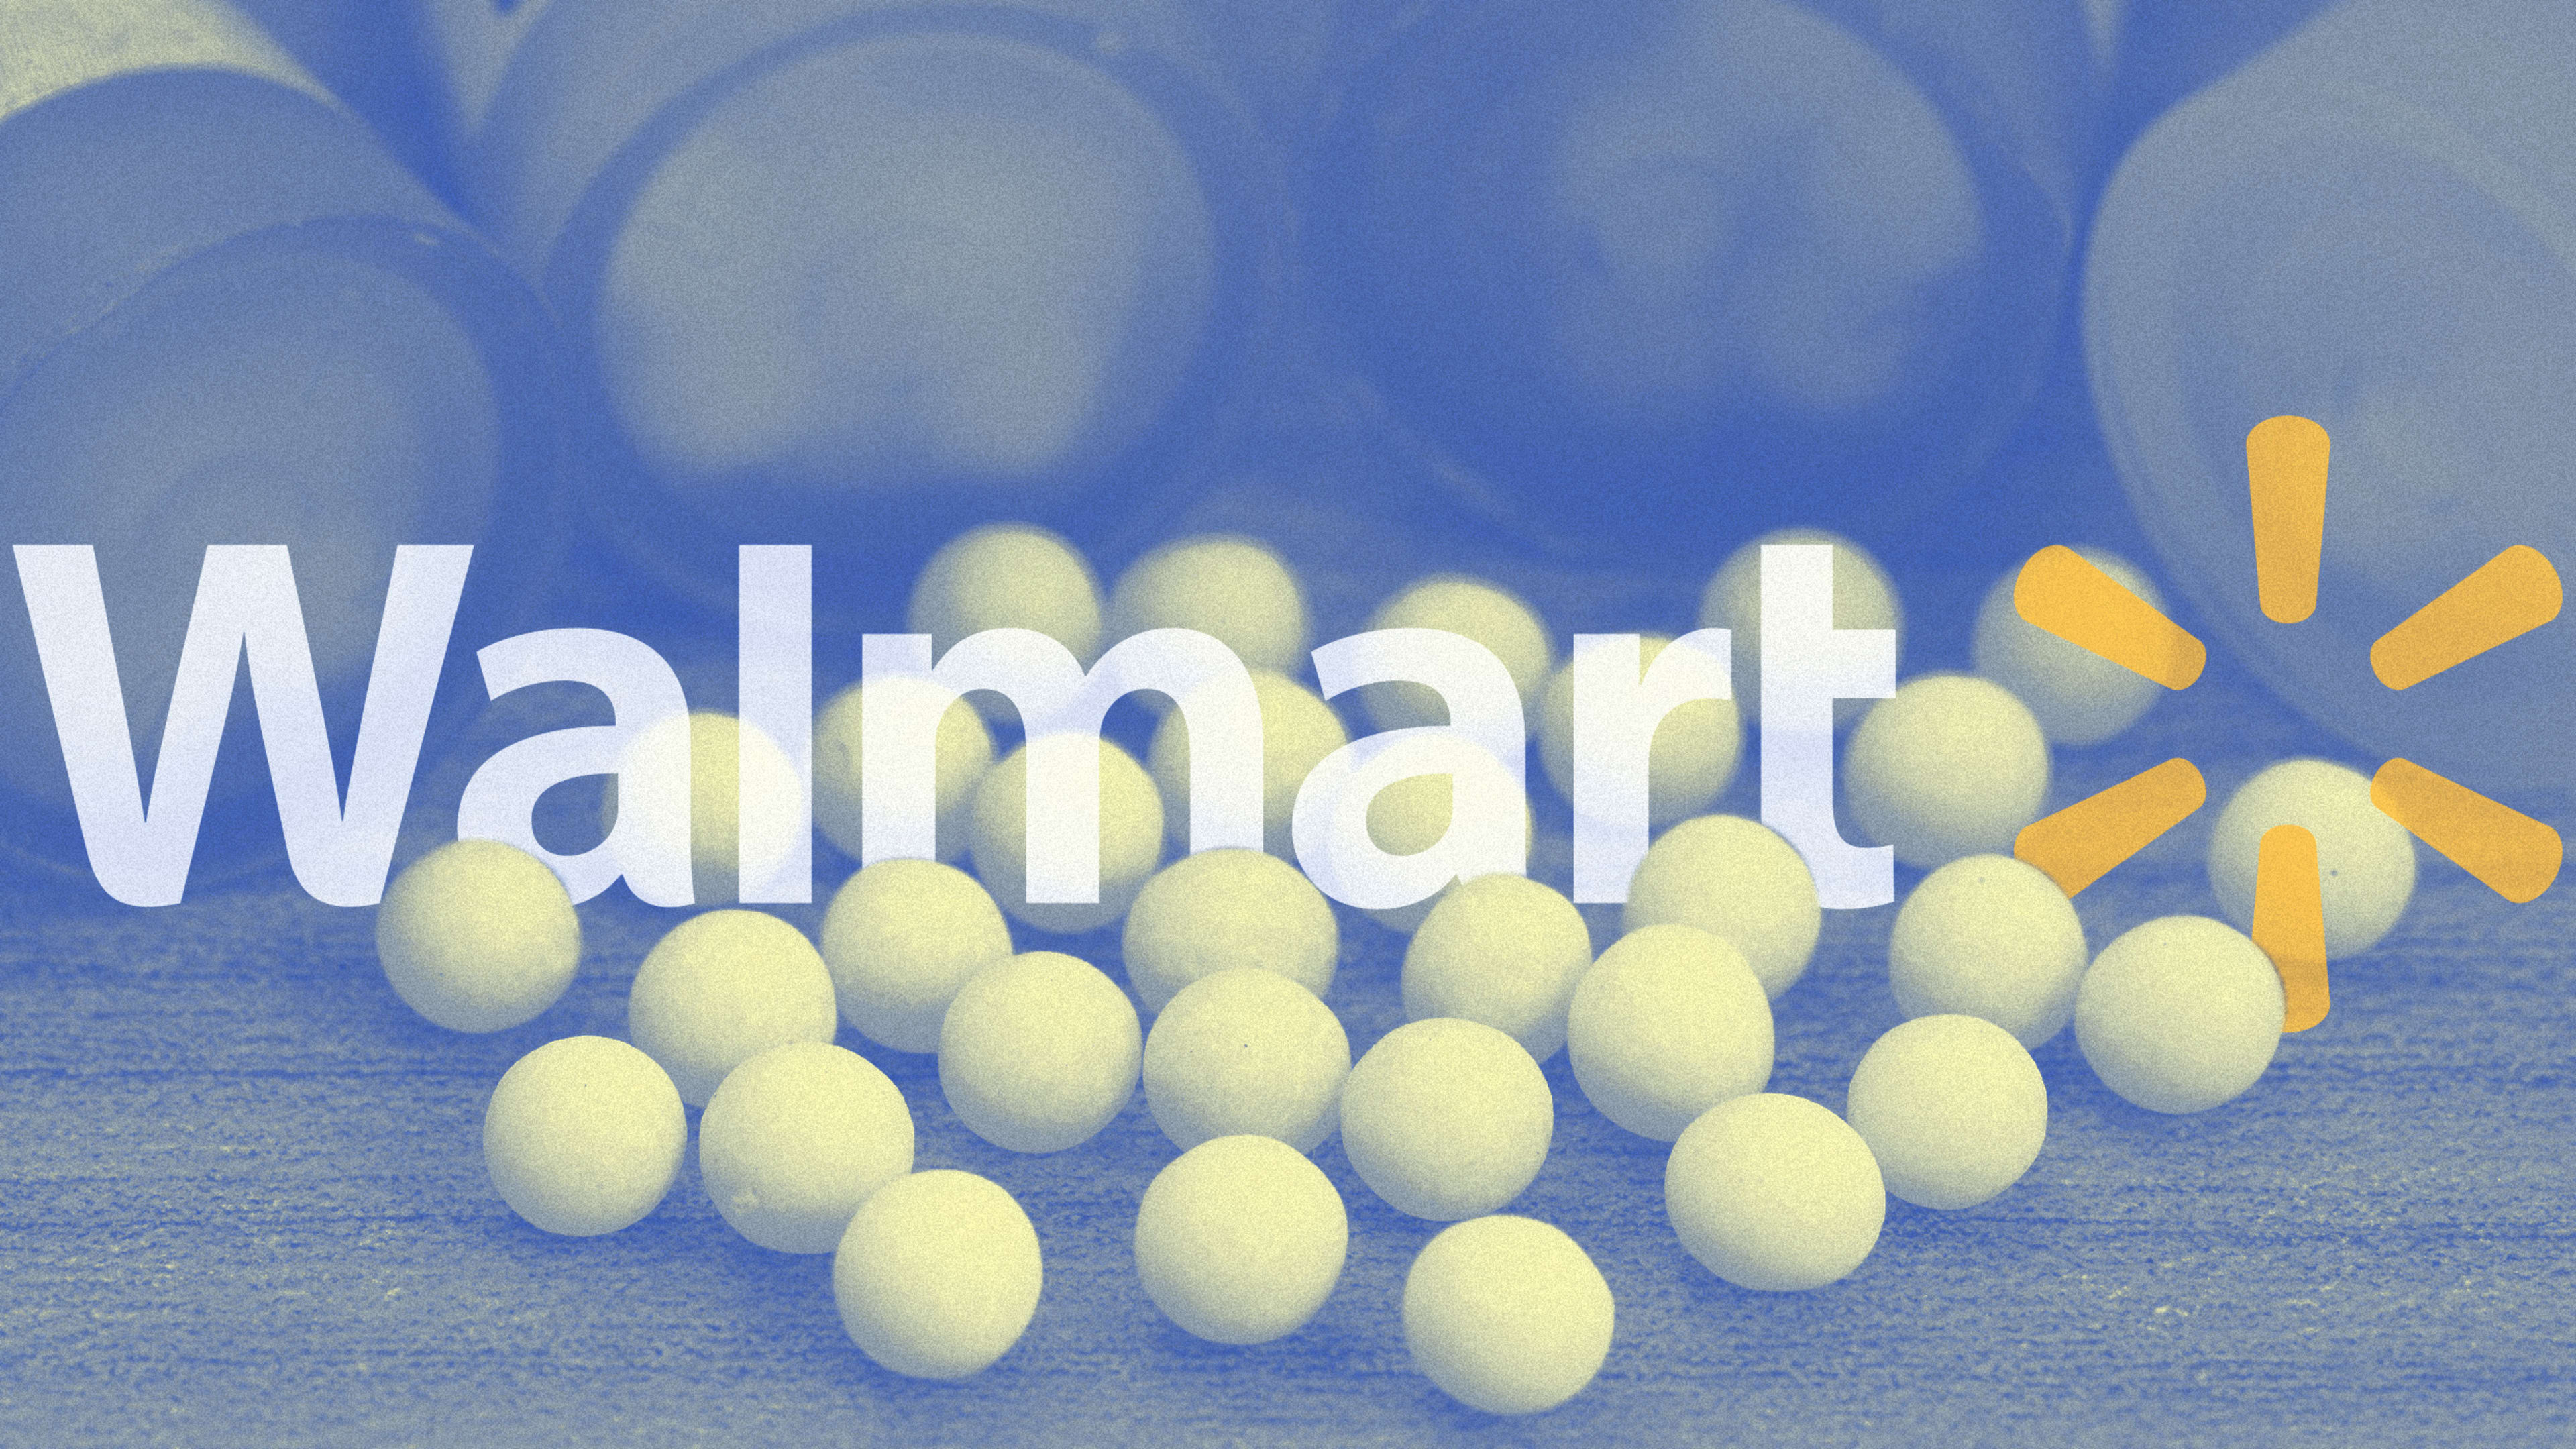 Exclusive: Watchdog group sues Walmart for selling “nonsense” homeopathic remedies